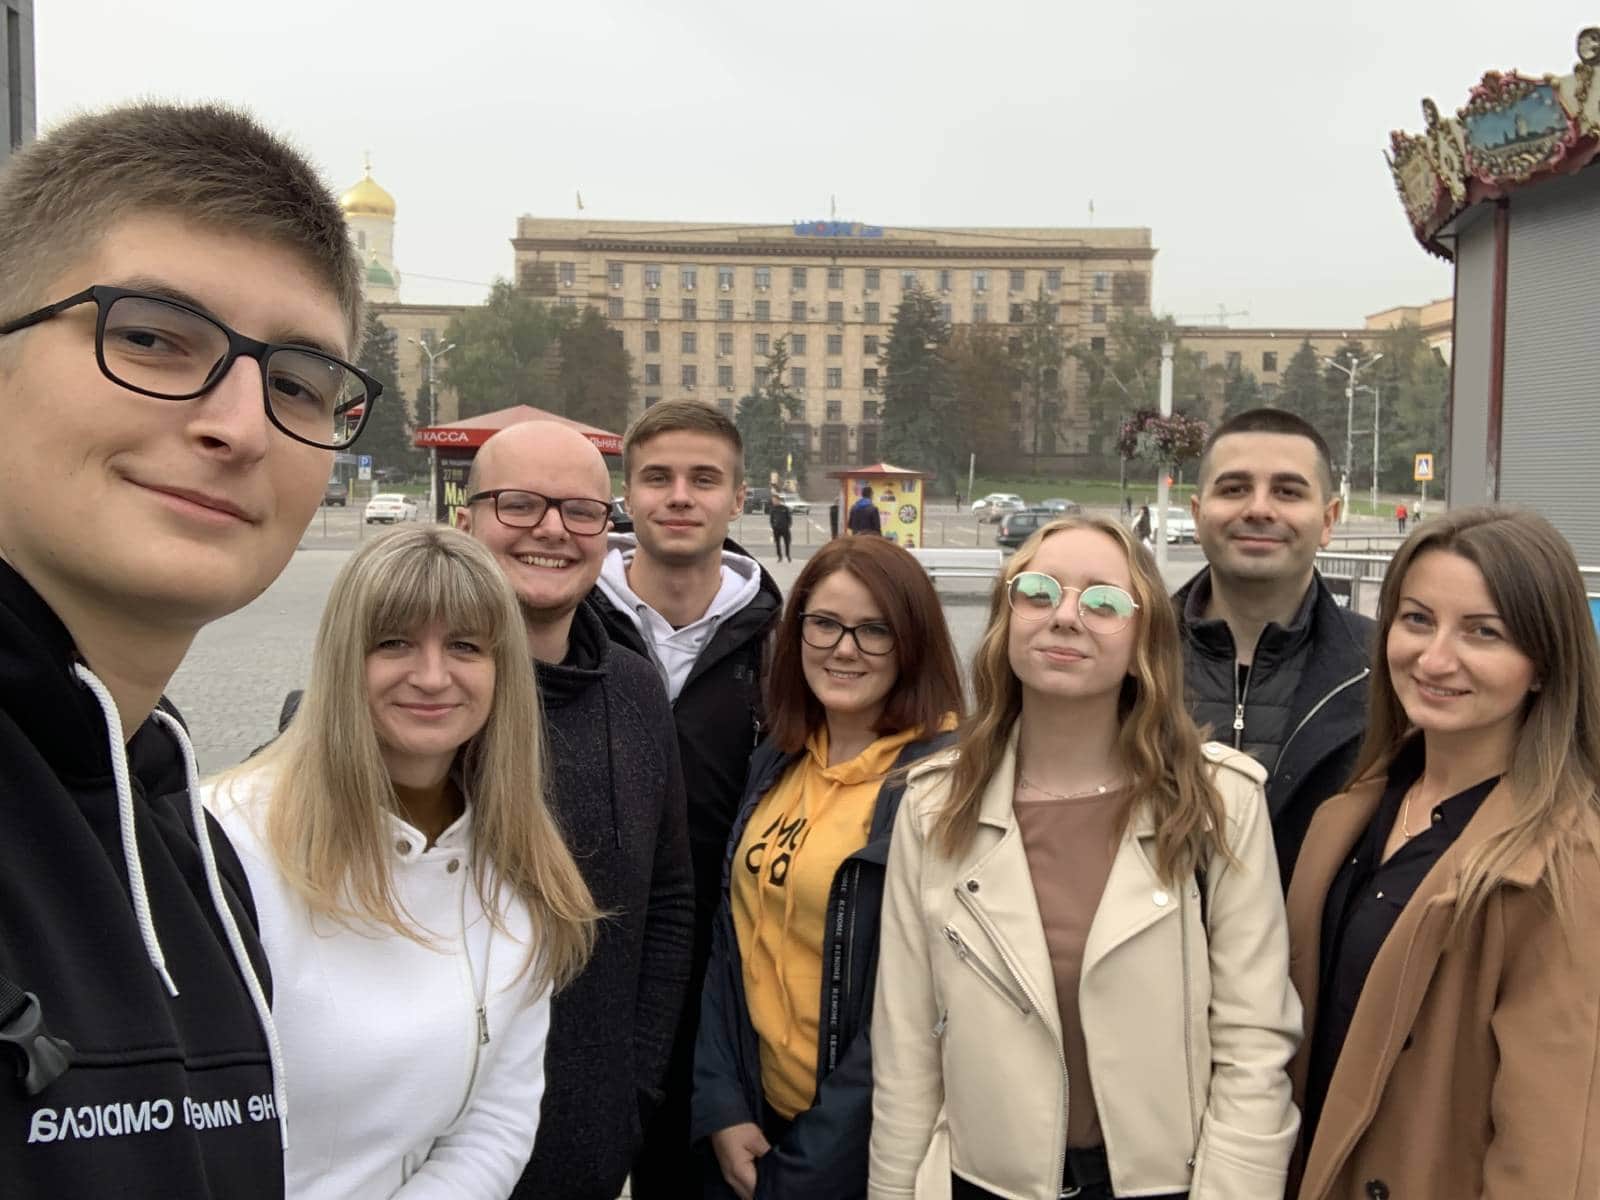 EXPANS на Dnipro Marketing Conference 2020